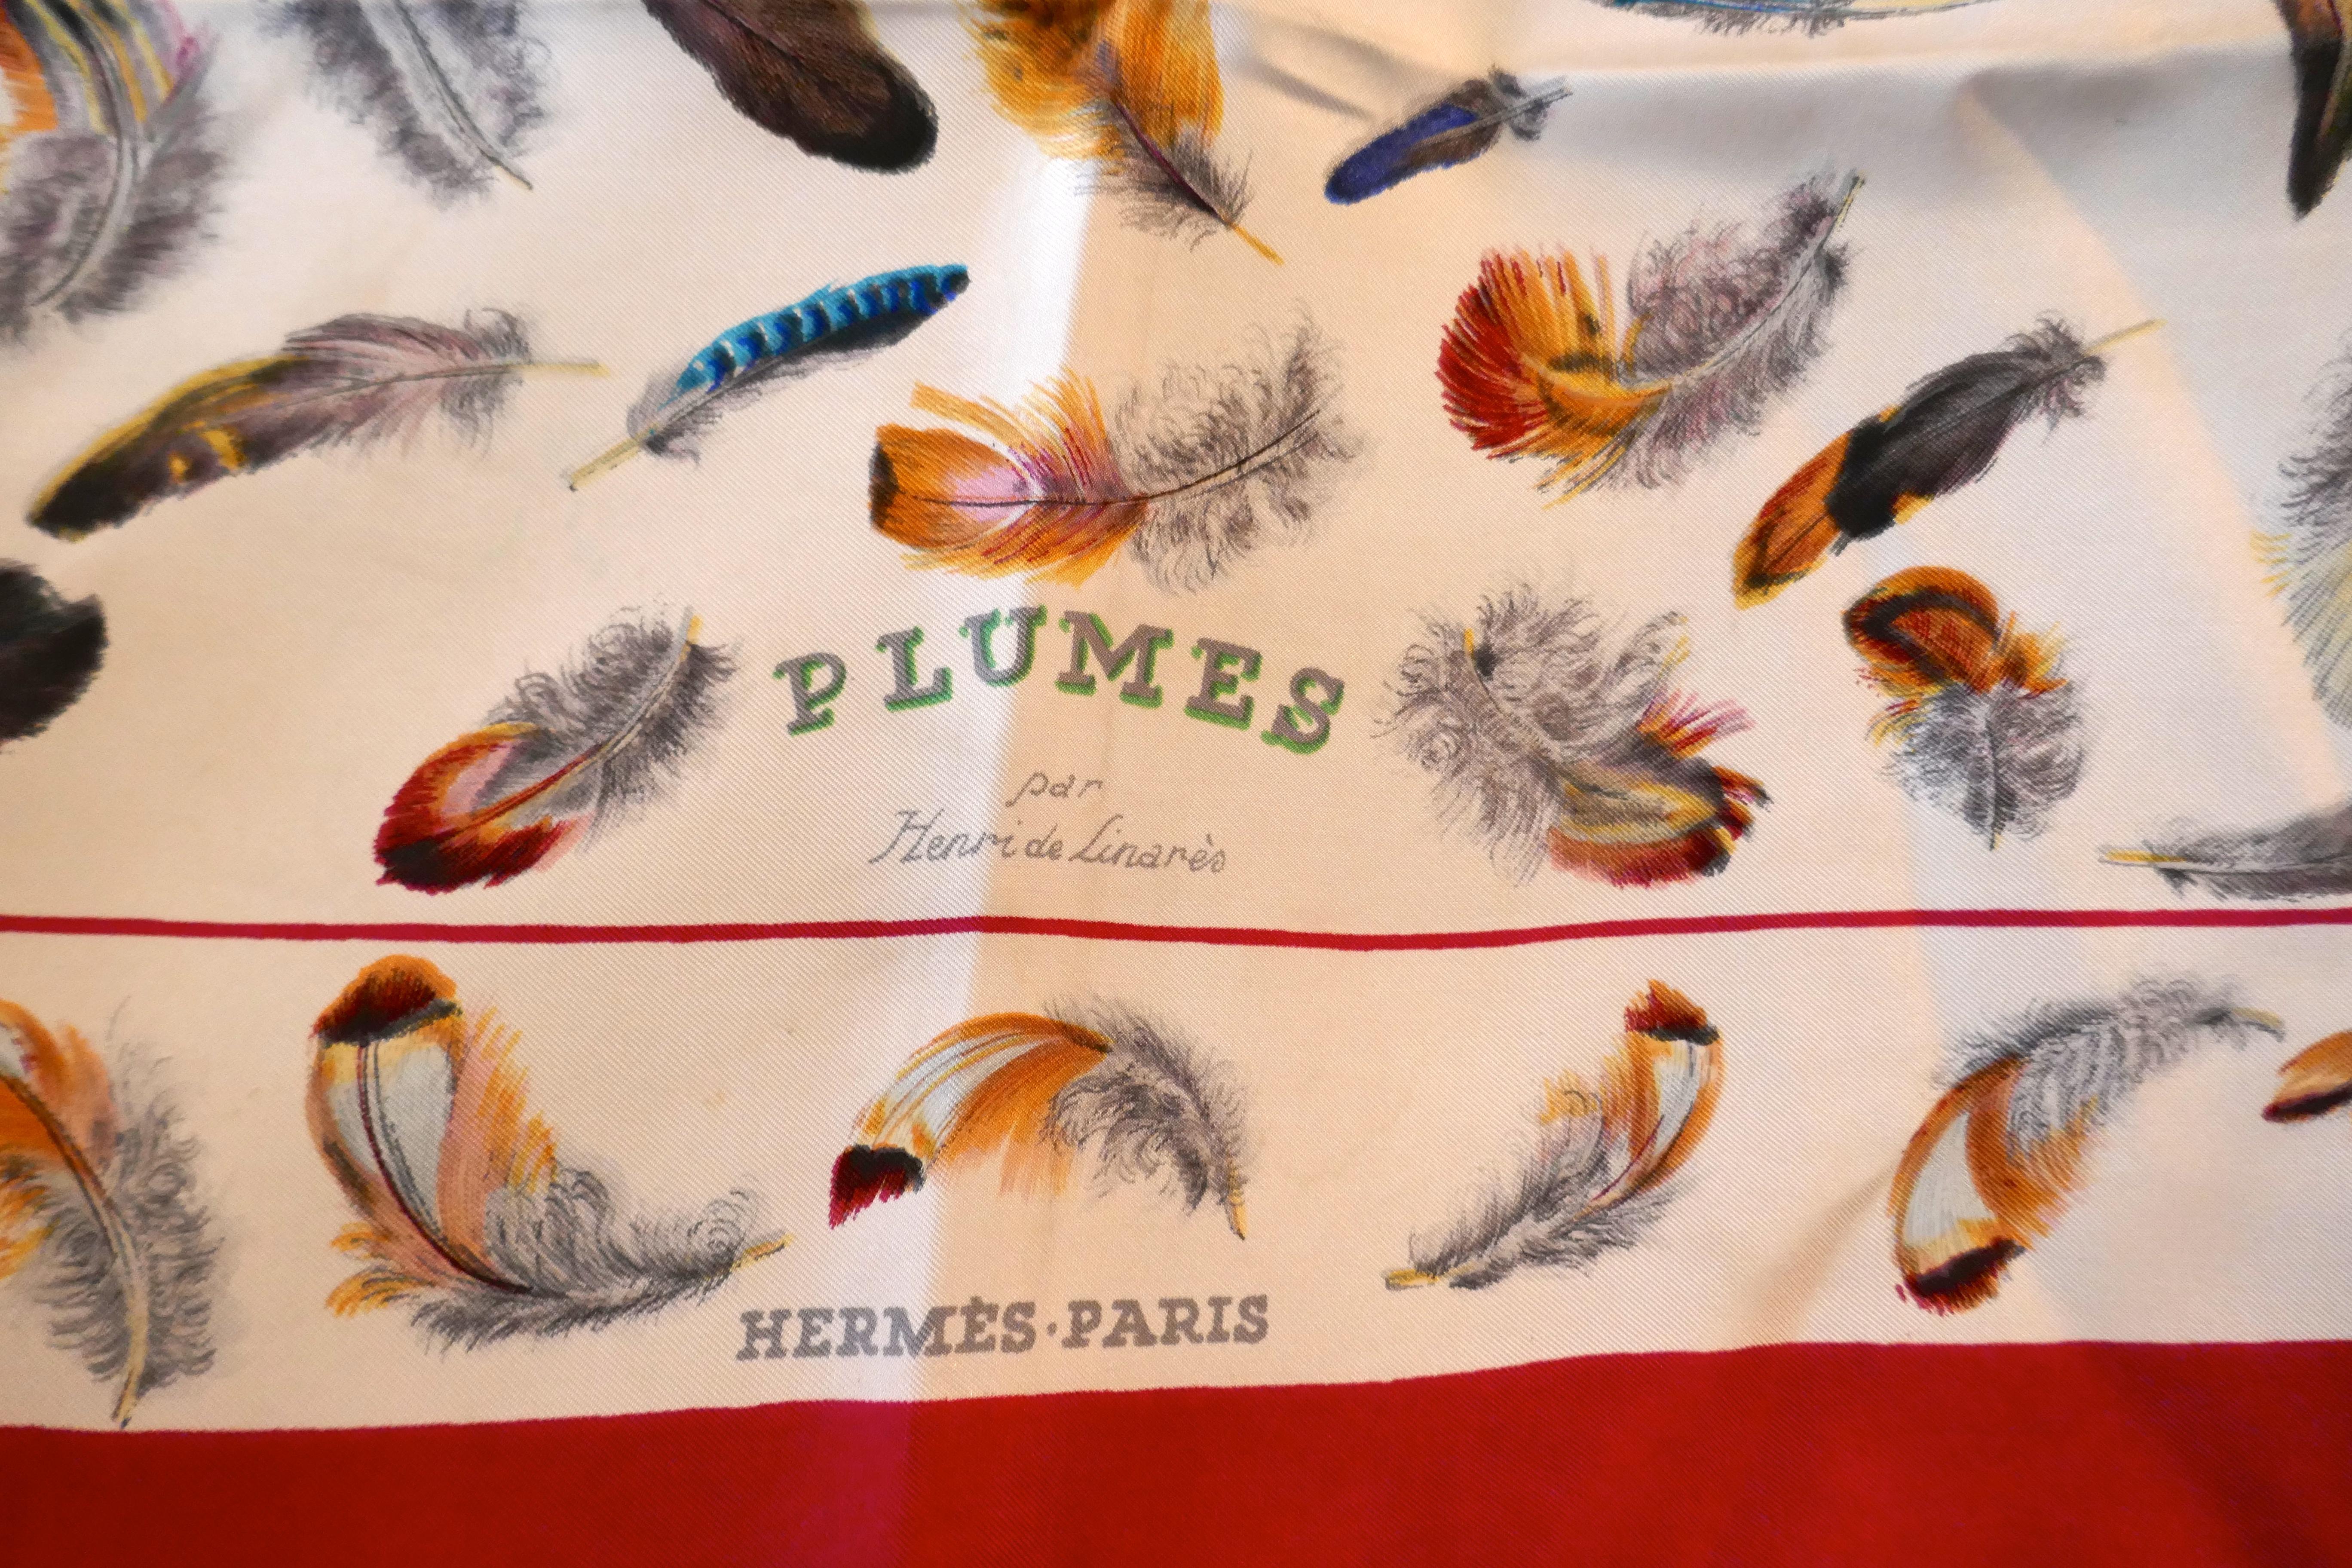 HERMÈS Vintage Silk Scarf design by Henri de Linares “Plumes” 100% Silk Scarf, Red Border

Feathers in wonderful colour and detail,  dating from 1953. Pre copyright
This design has the designer’s Signature 
The scarf in good condition, boxed and